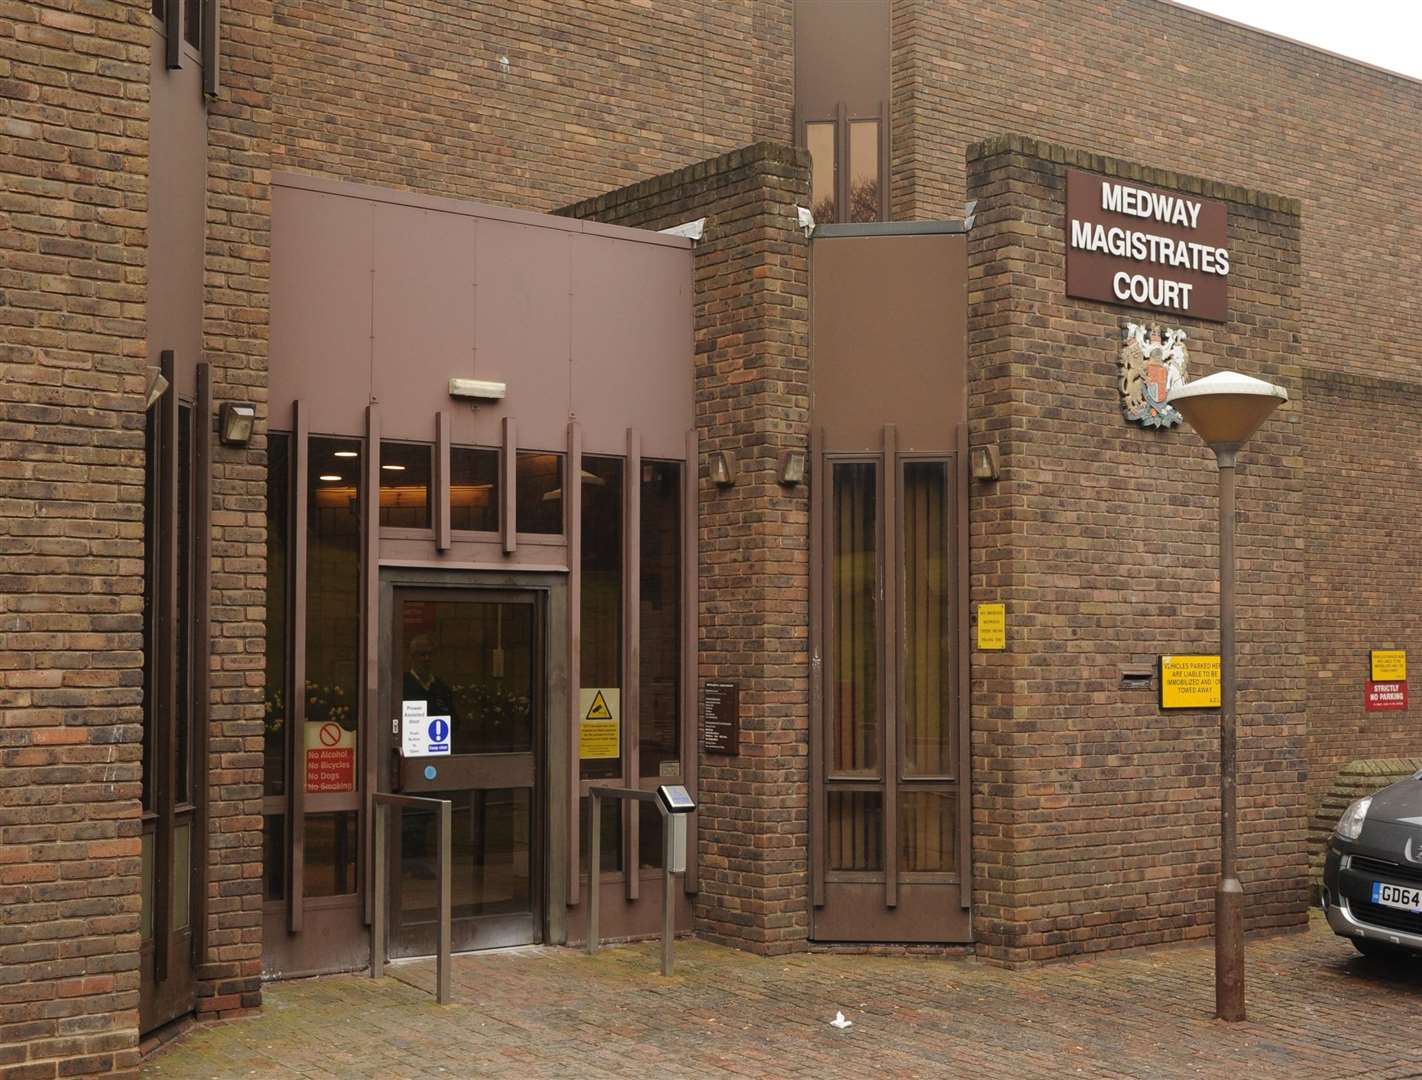 Medway Magistrates Court in Chatham